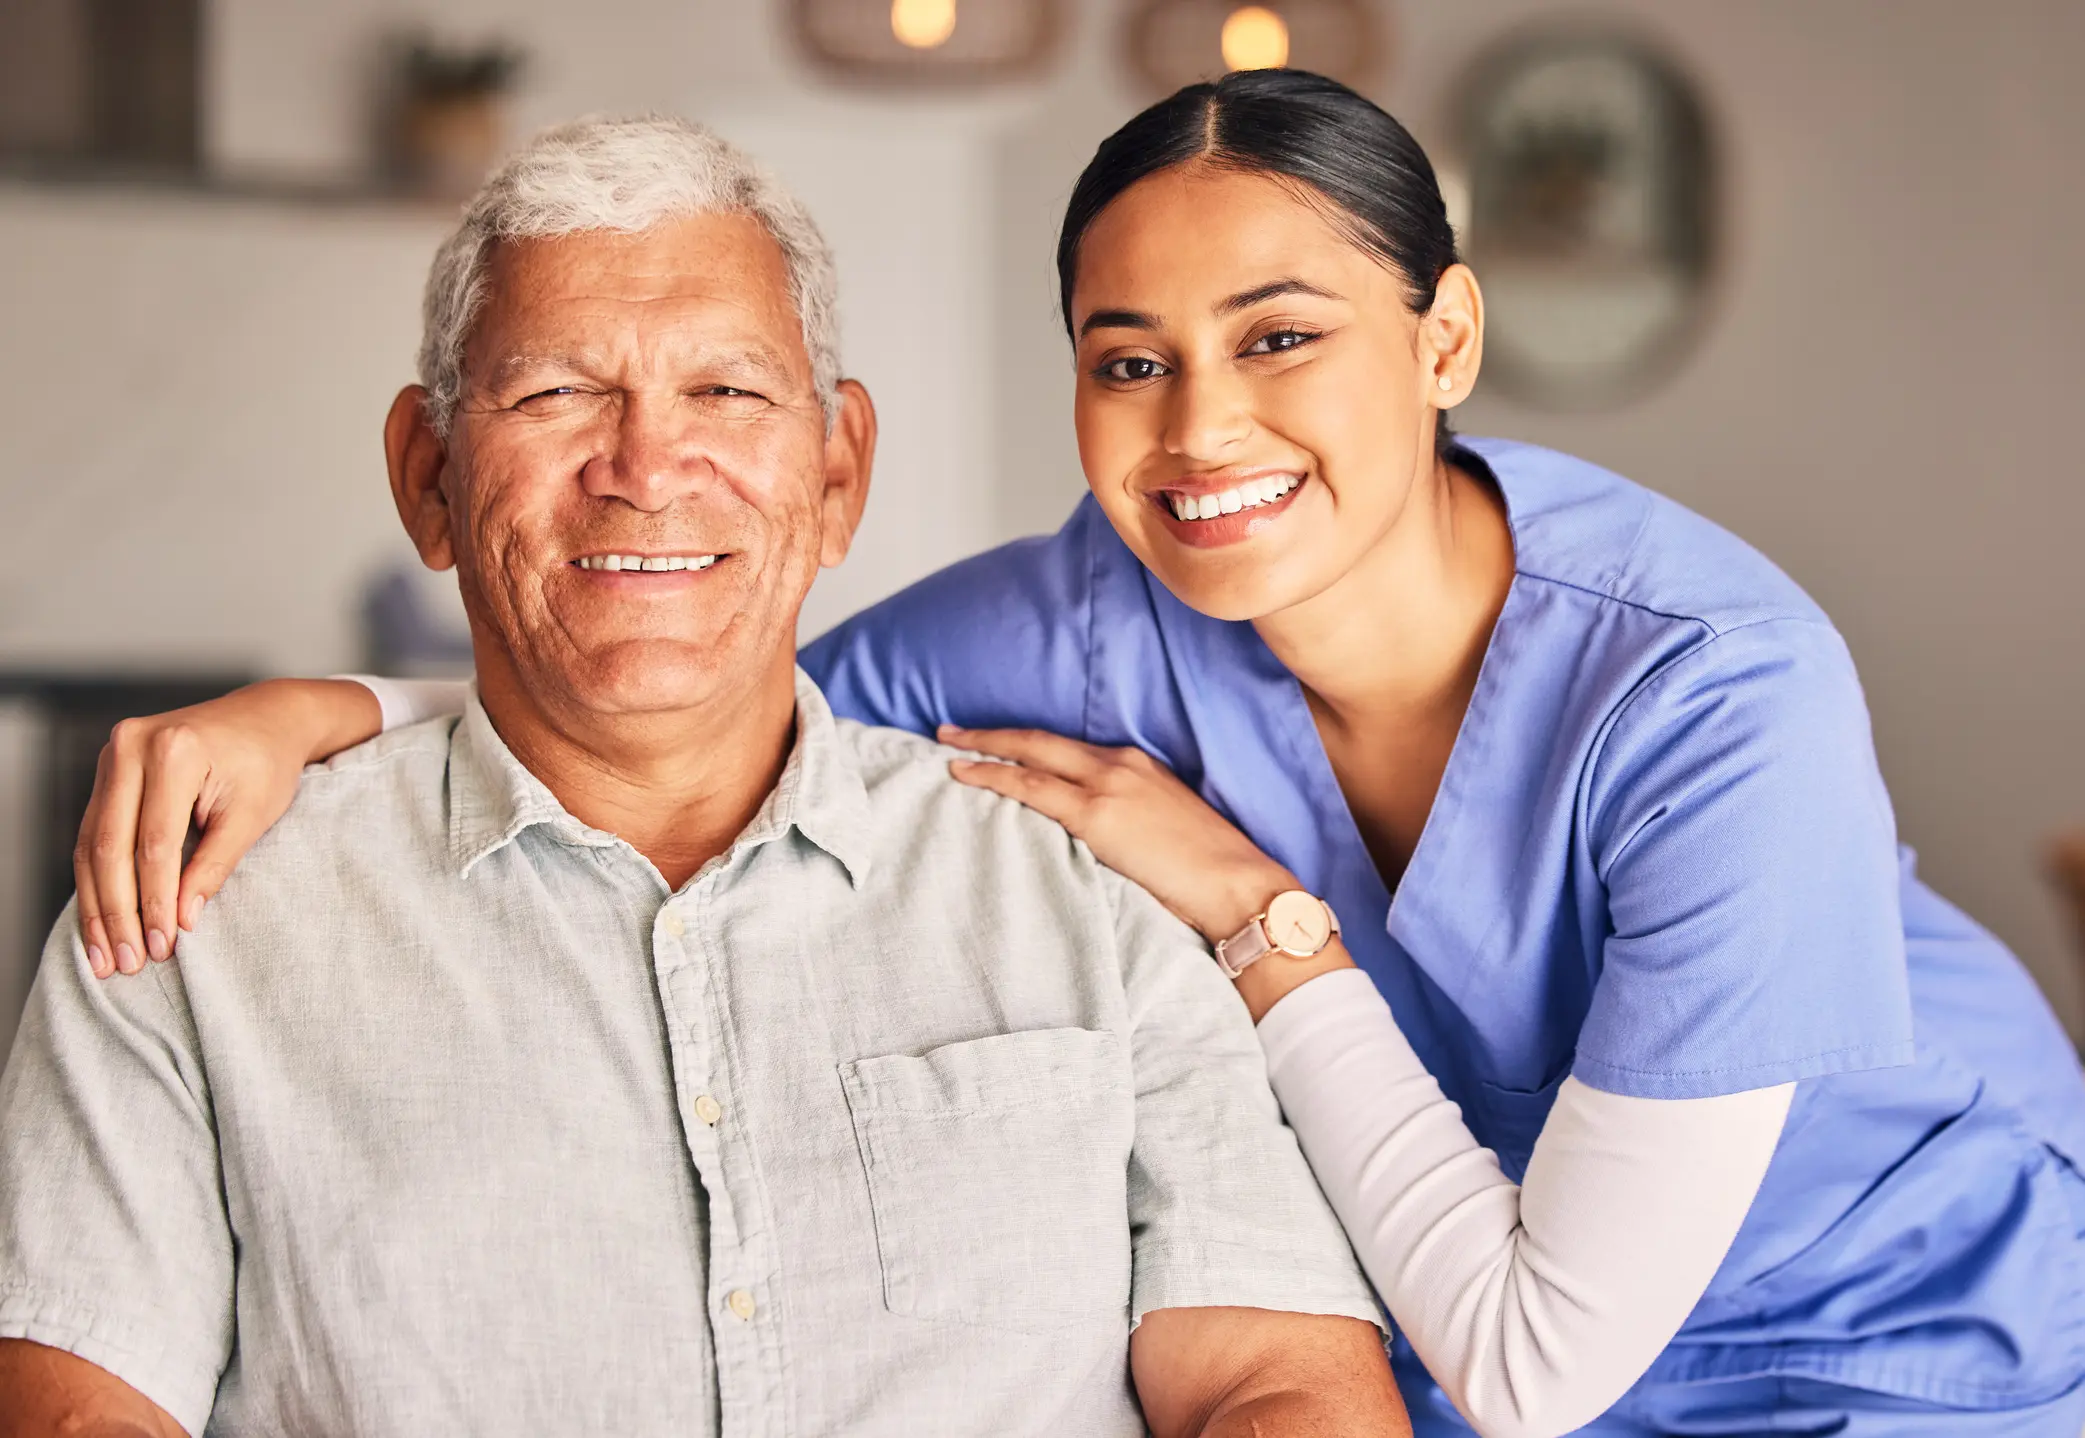 Getting Started With In-Home Care